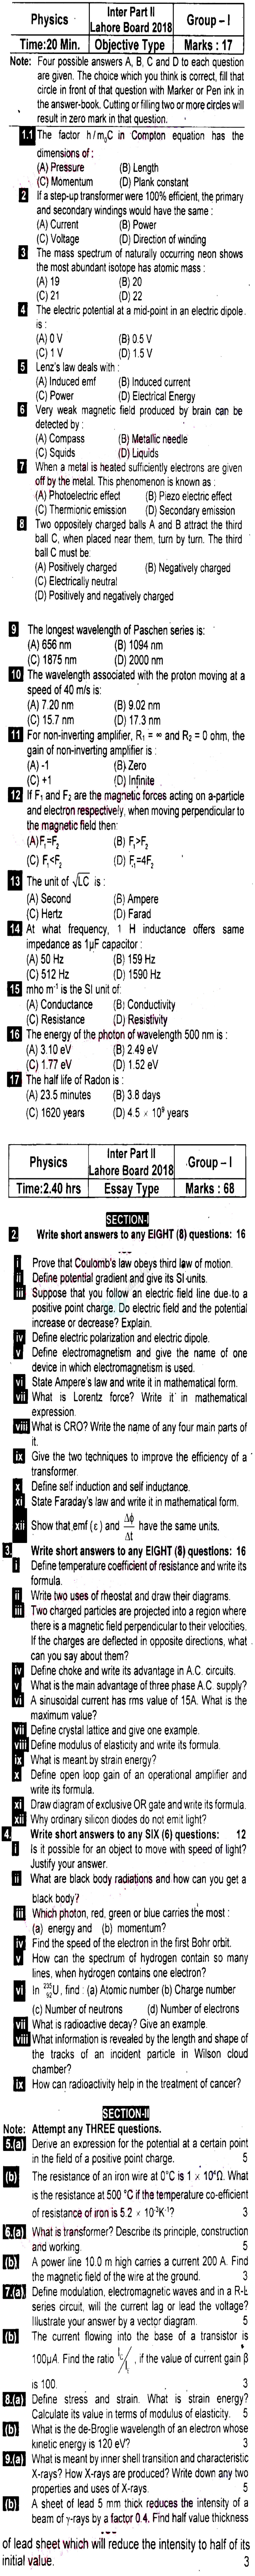 Physics 12th class Past Paper Group 1 BISE Lahore 2018